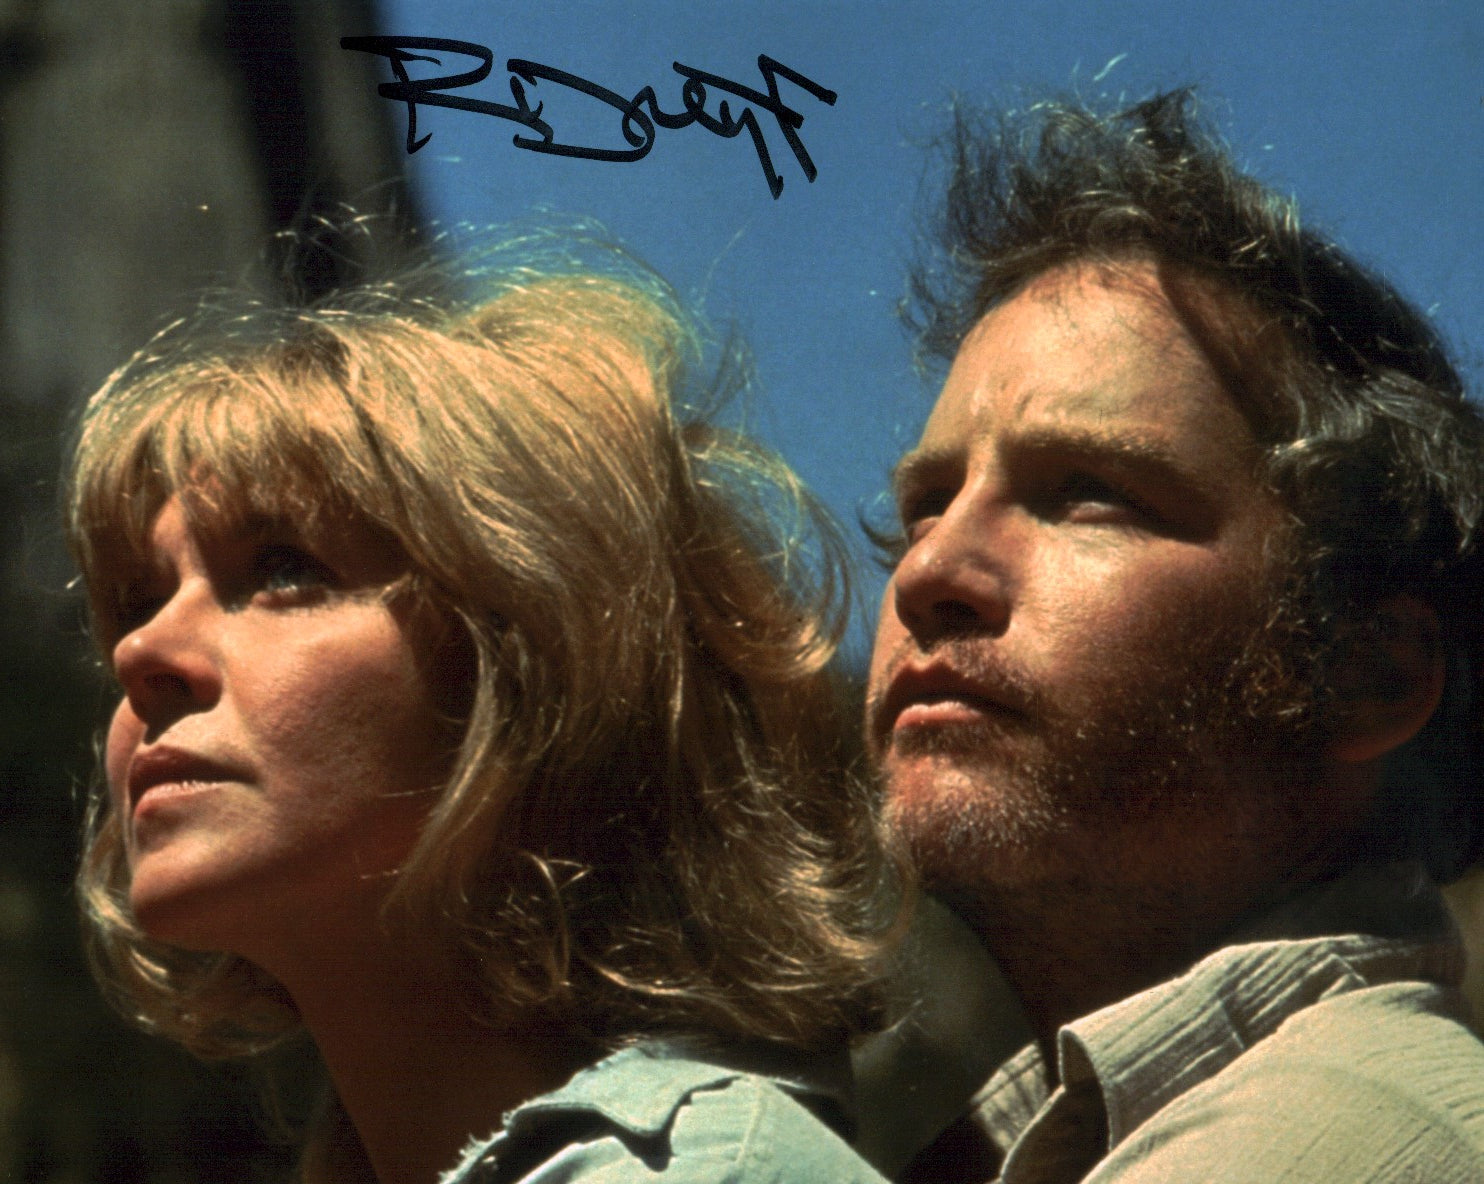 Richard Dreyfuss Close Encounters of the Third Kind 8x10 Signed Photo JSA COA Certified Autograph GalaxyCon